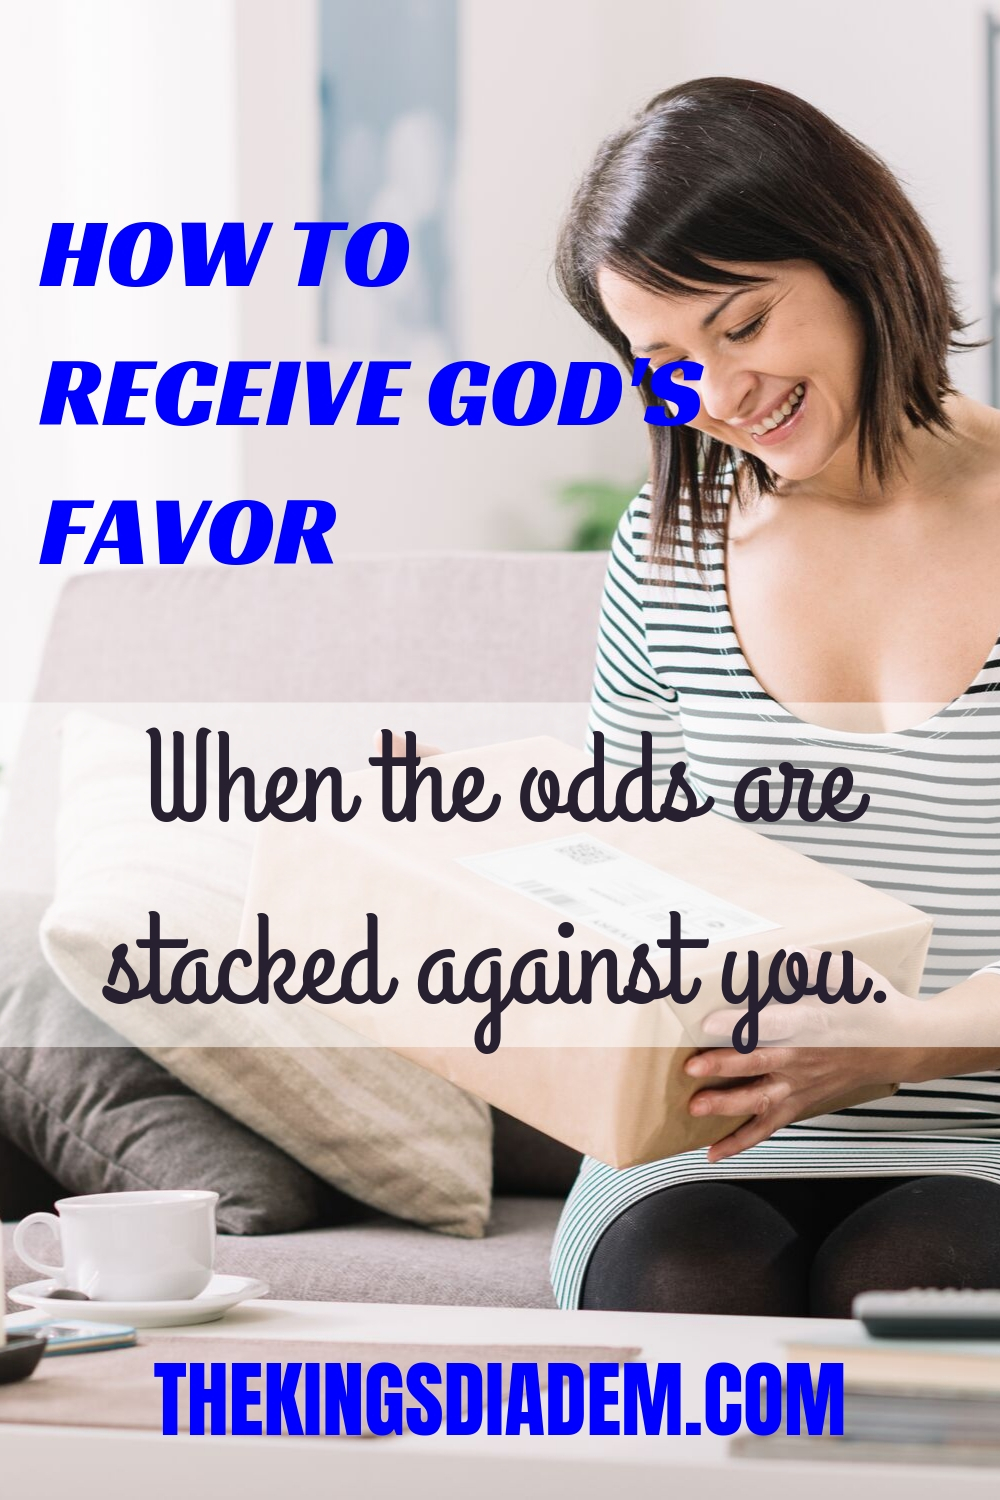 How one woman who was hated got the advantage and obtained God's favor